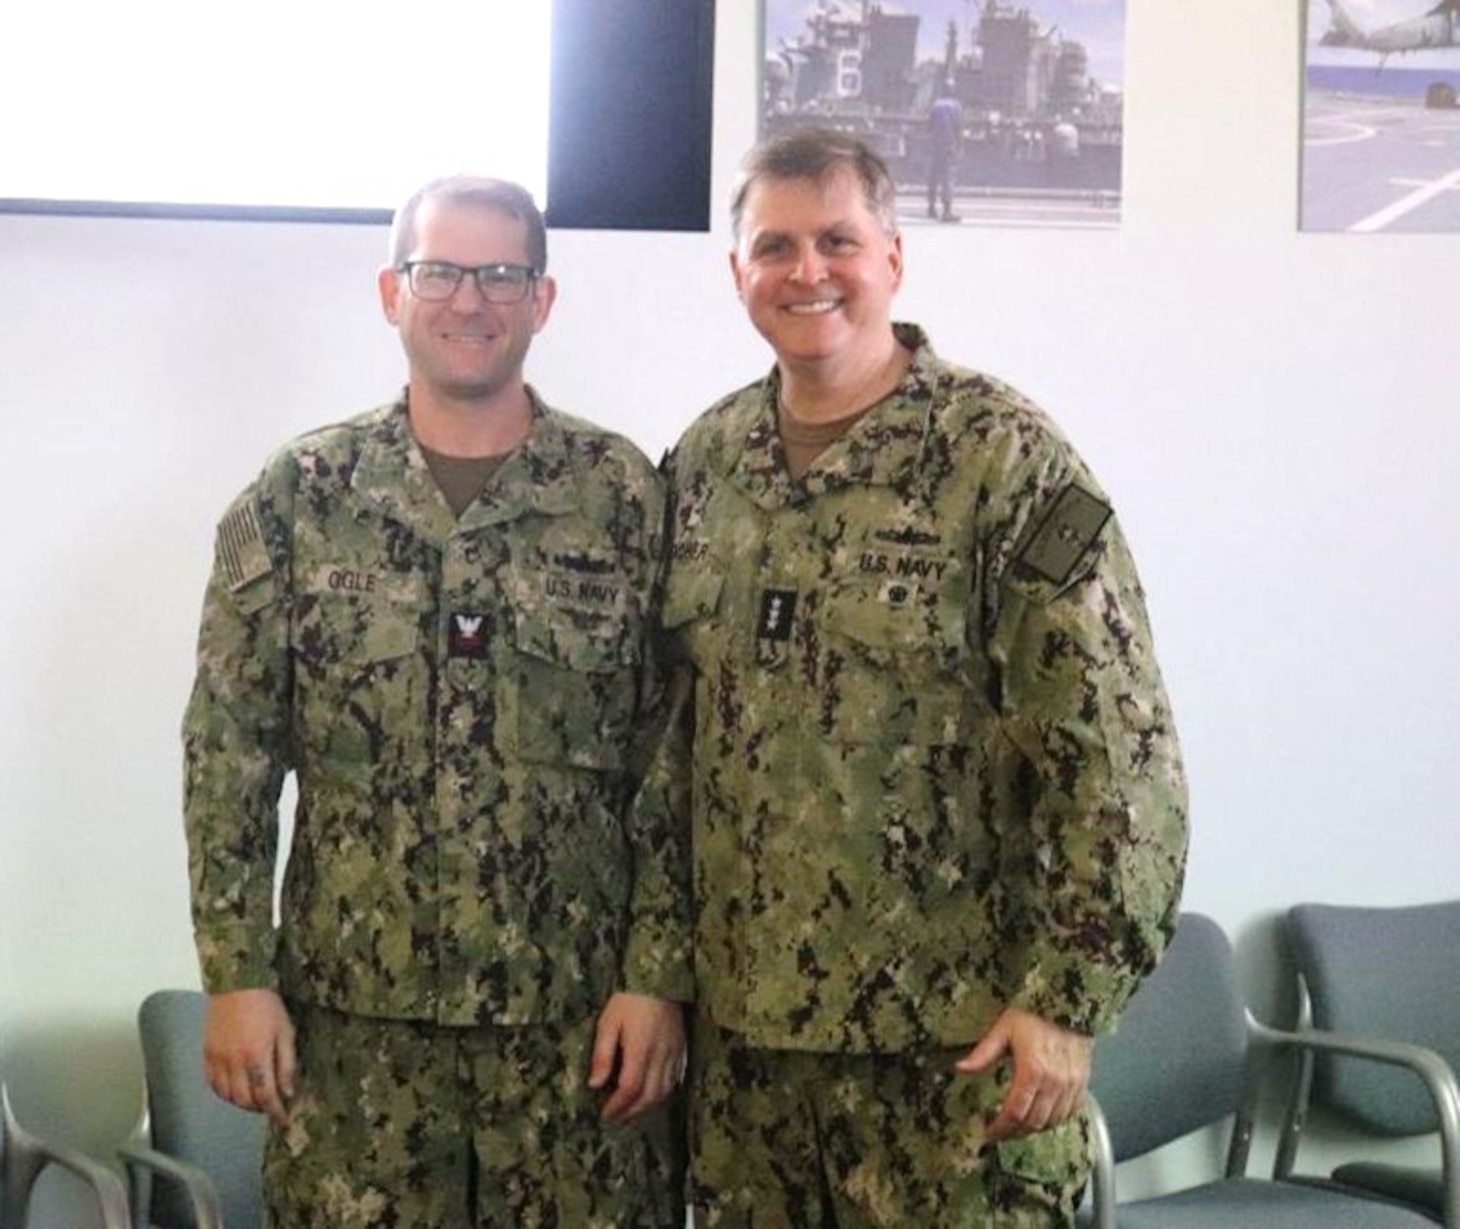 SINGAPORE (March 22, 2024) - Vice Adm. Fred Kacher, Commander, U.S. 7th Fleet (center) poses for a photo with Commander, Destroyer Squadron (DESRON) 7, Sailor of the Year, Gunner’s Mate 1st Class Daniel Ogle, March 22. As the U.S. Navy’s destroyer squadron forward-deployed in Southeast Asia, DESRON 7 serves as the primary tactical and operational commander of littoral combat ships rotationally deployed to Singapore, Expeditionary Strike Group (ESG) 7’s Sea Combat Commander and builds partnerships through training exercises and military-to-military engagements. (U.S. Navy photo by Lt. j.g. Rebecca Moore)